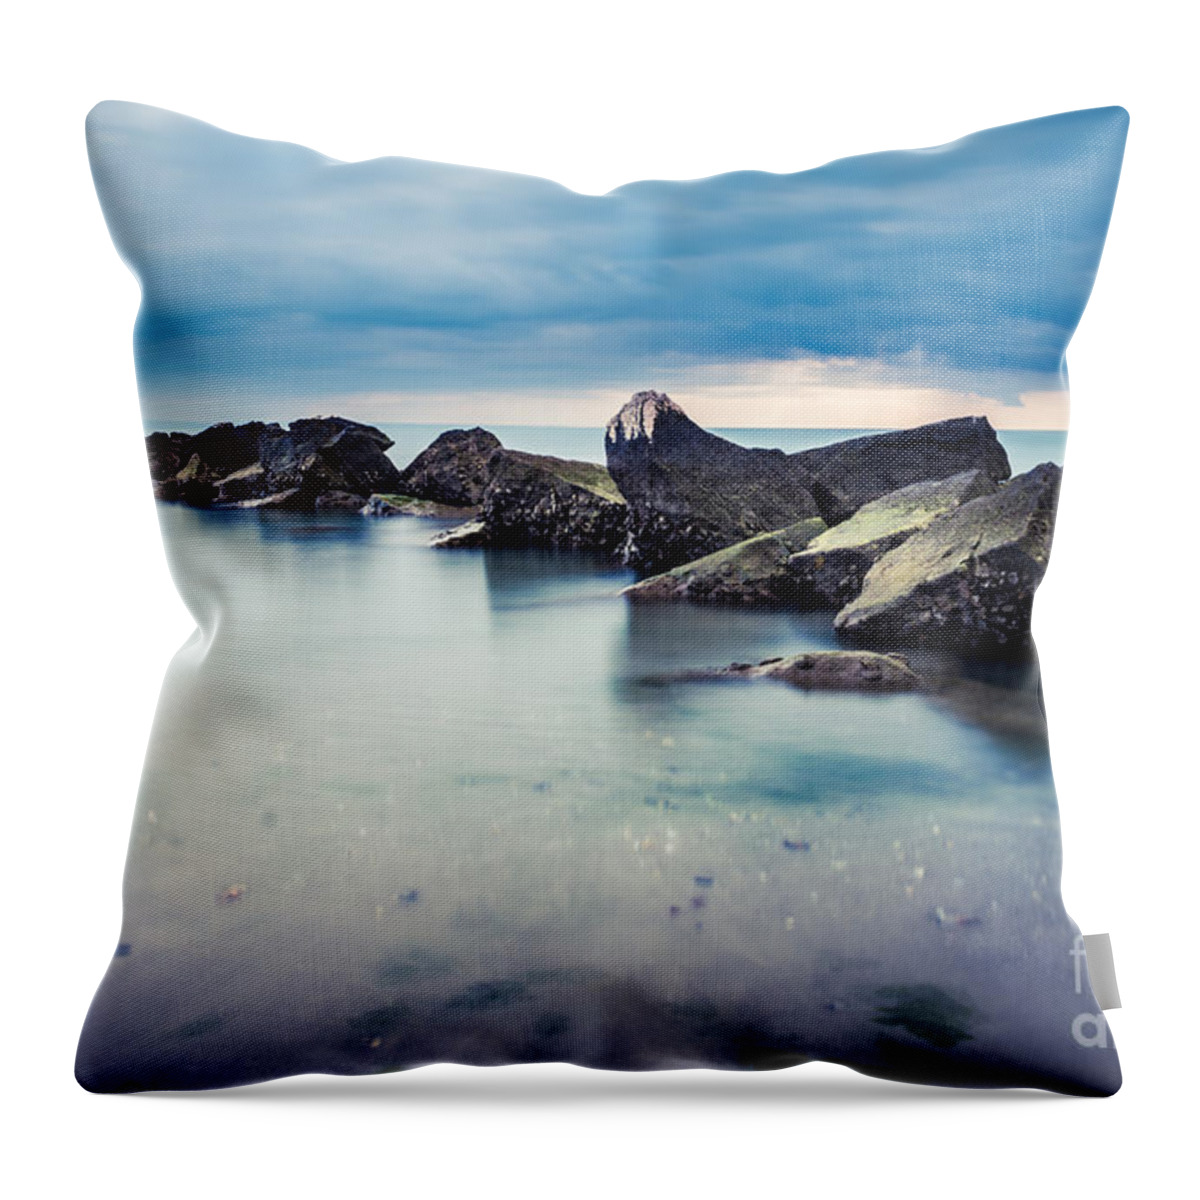 Adria Throw Pillow featuring the photograph Jetty by Hannes Cmarits